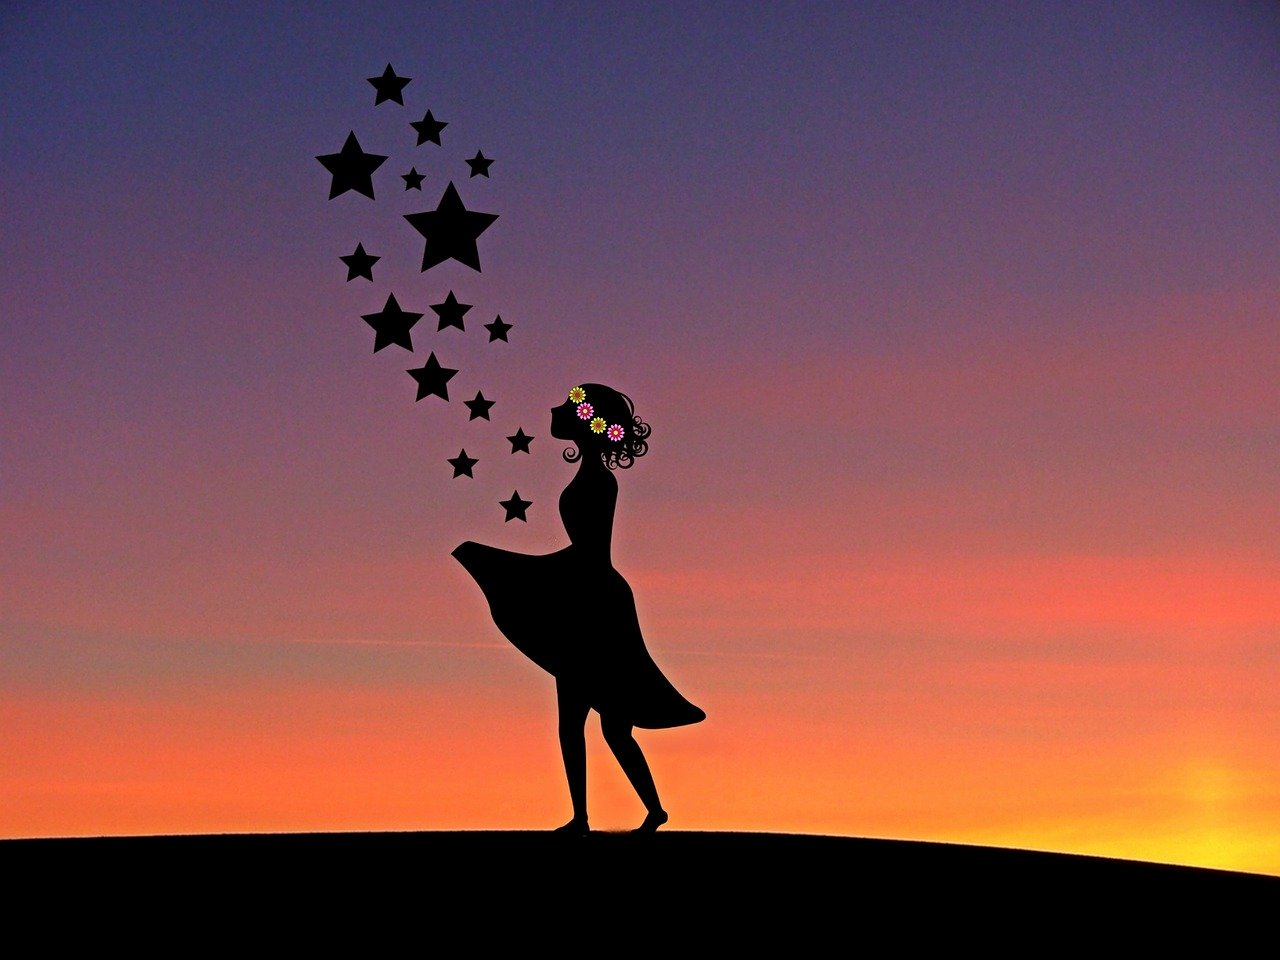 Silhouette of girl with stars rising to the sky